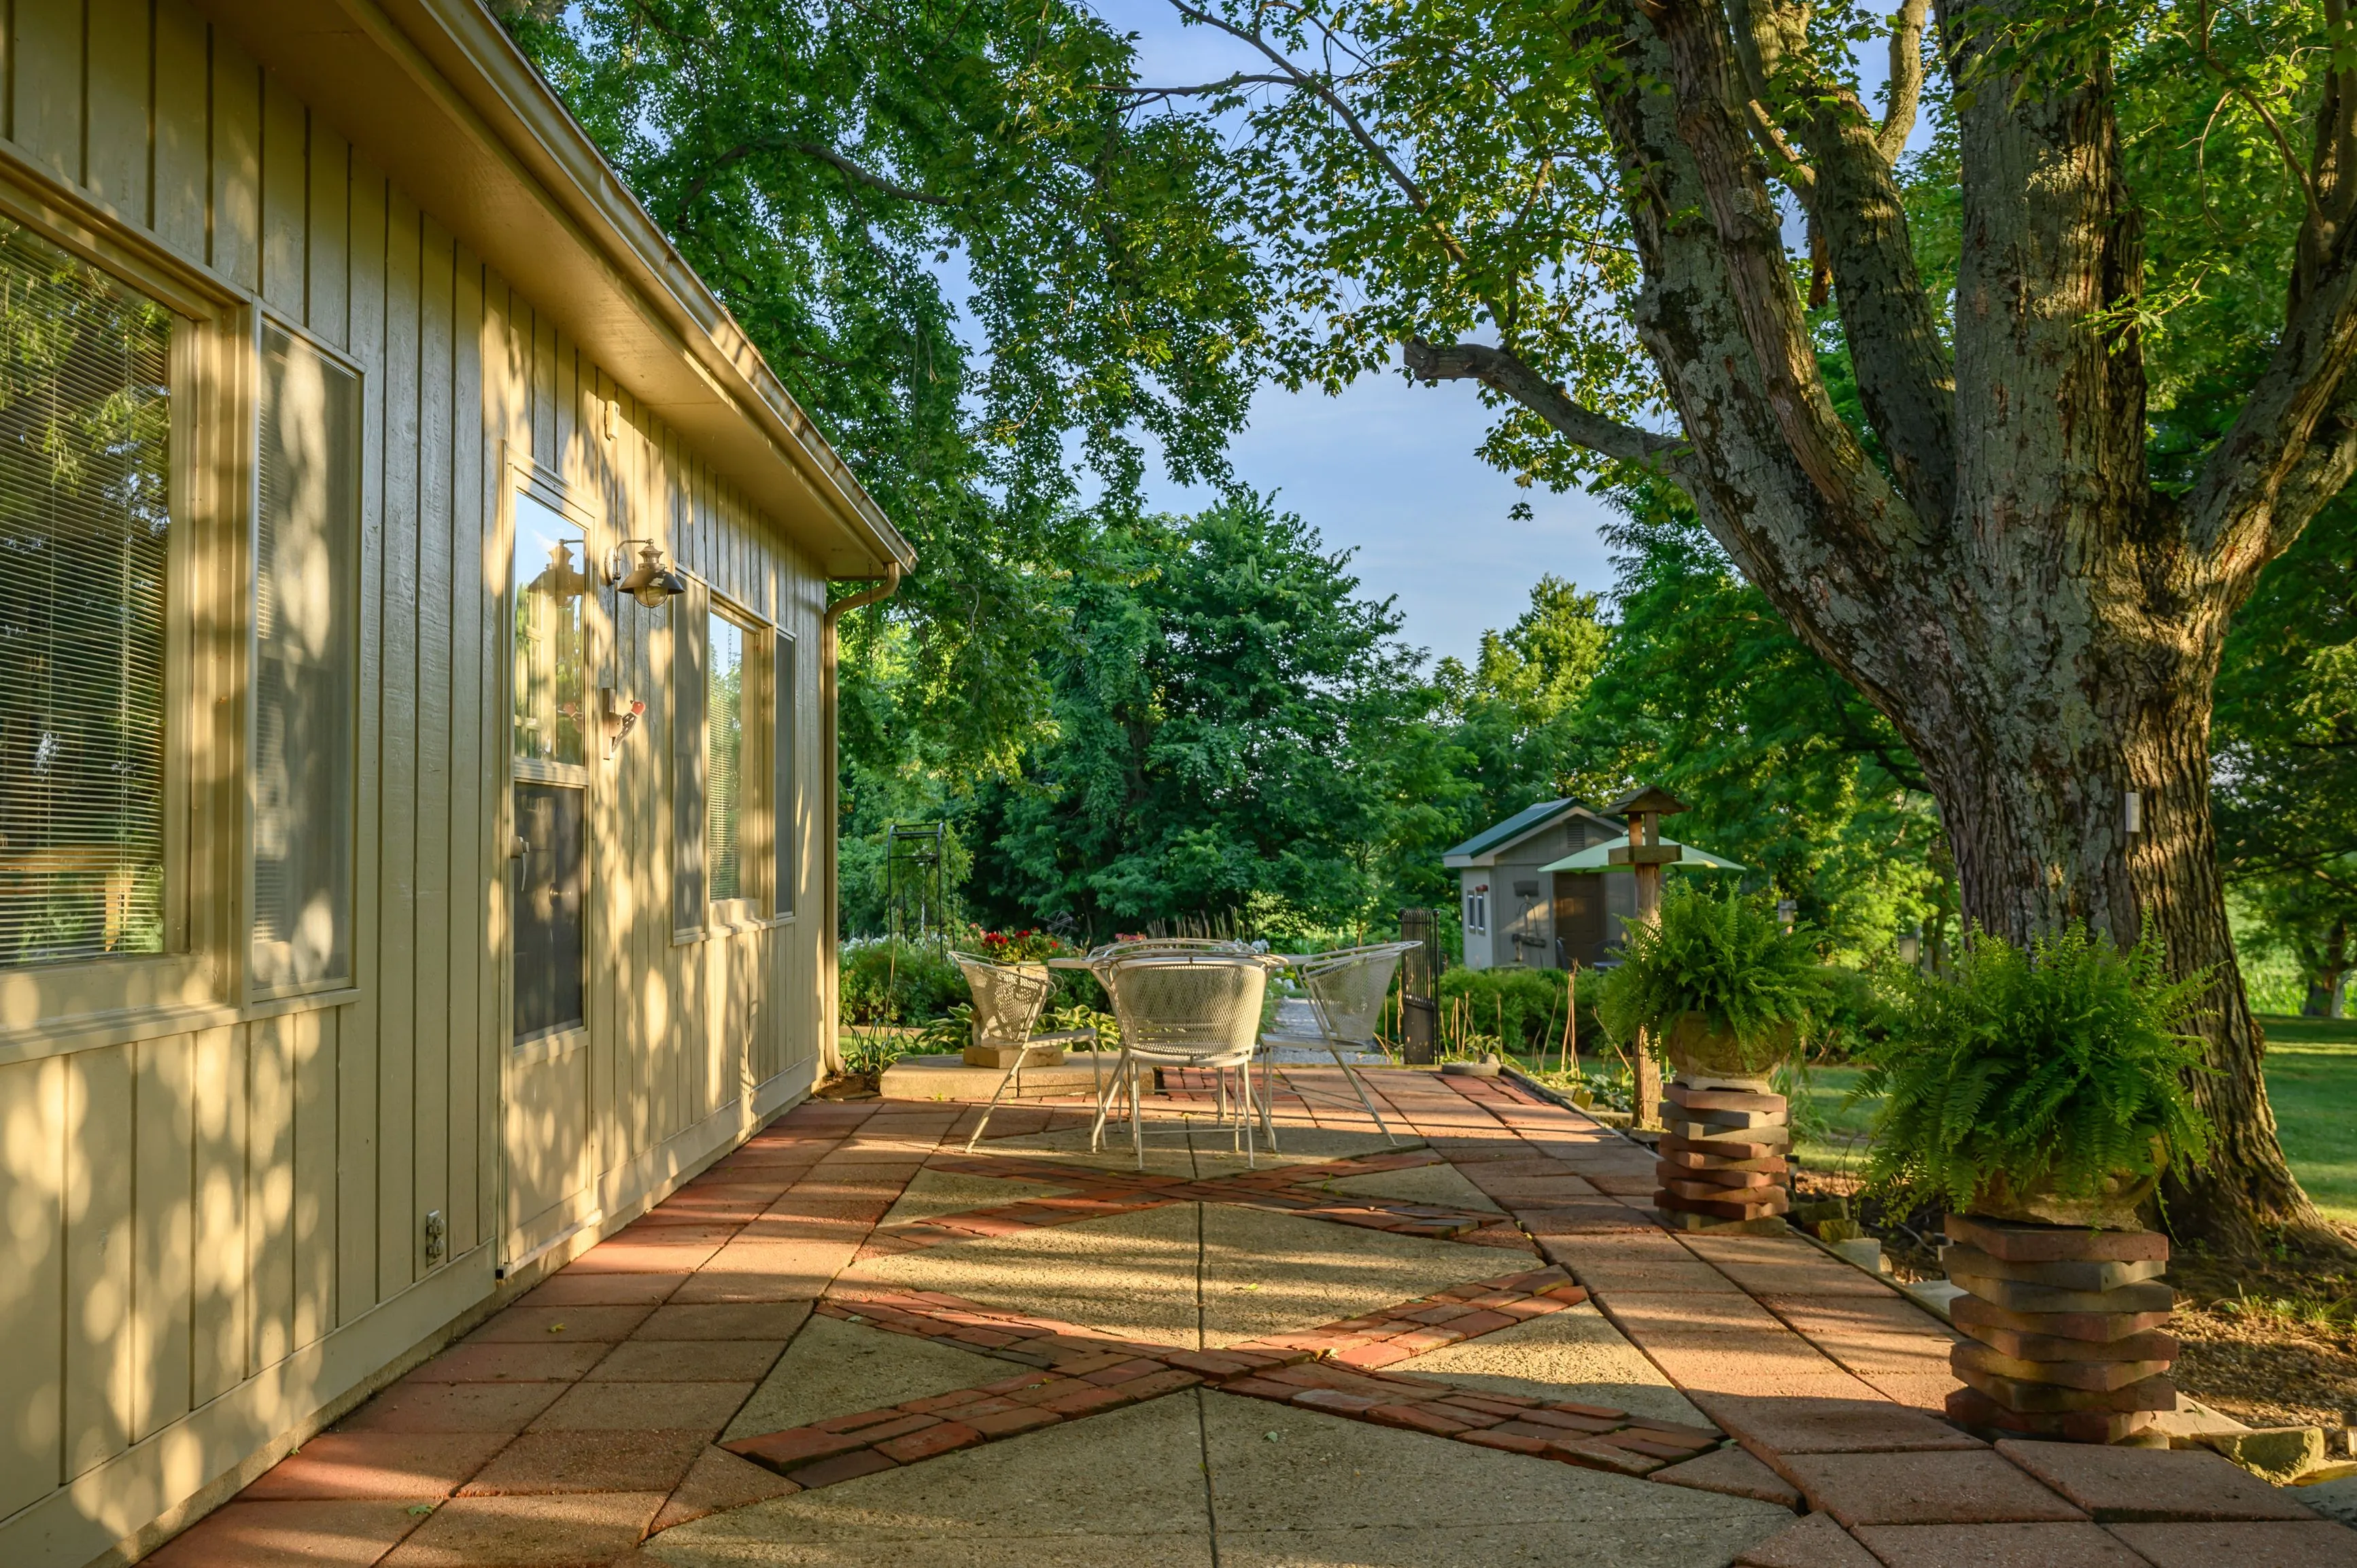 Patio with brick flooring, outdoor furniture, and large shade tree beside a house during the day.